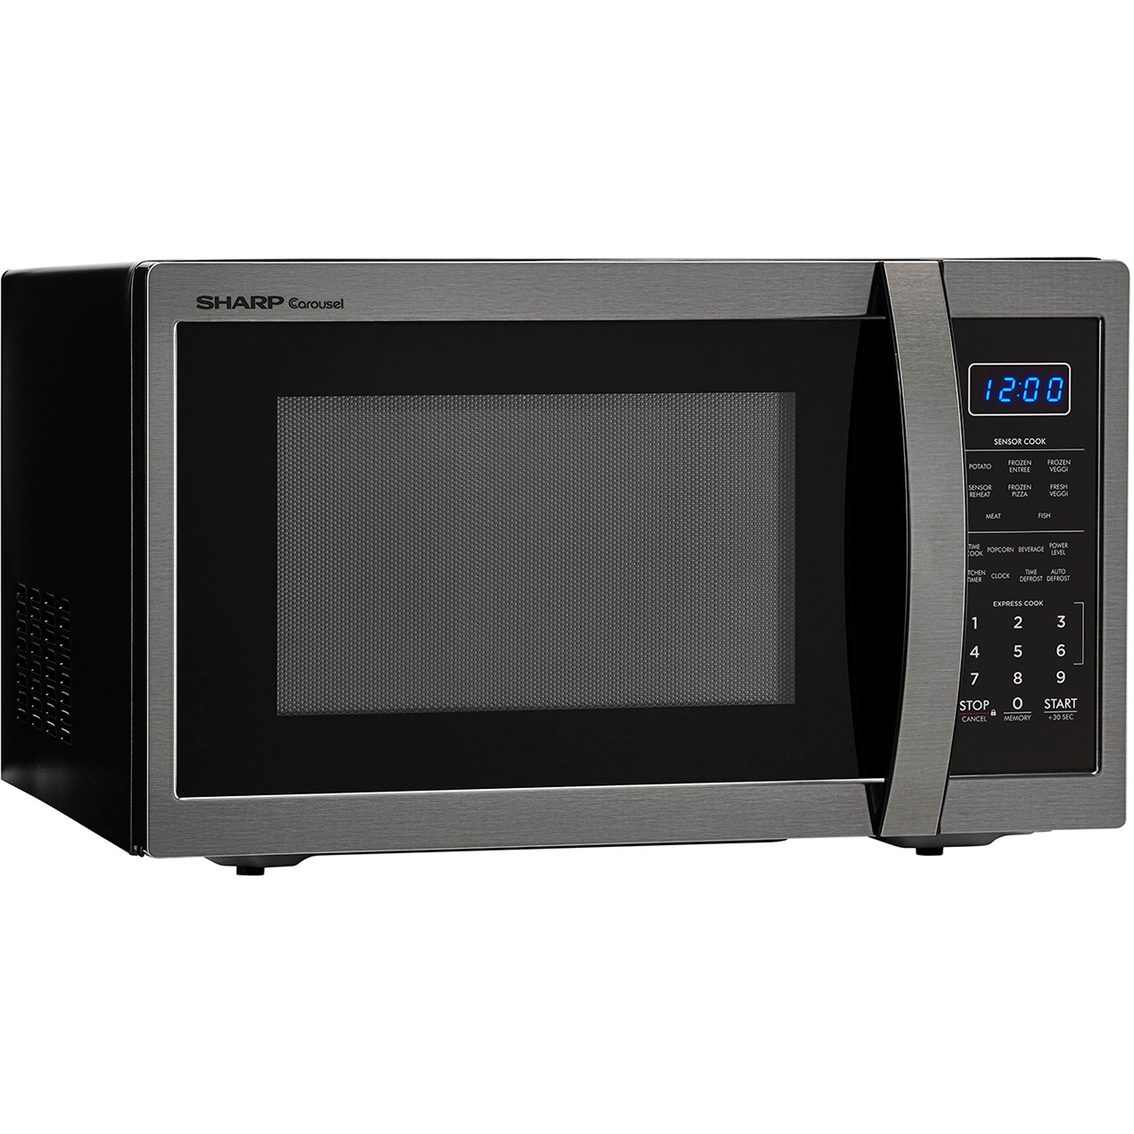 Sharp 1.4 cu. ft. Microwave Oven in Black Stainless Finish - Image 3 of 4